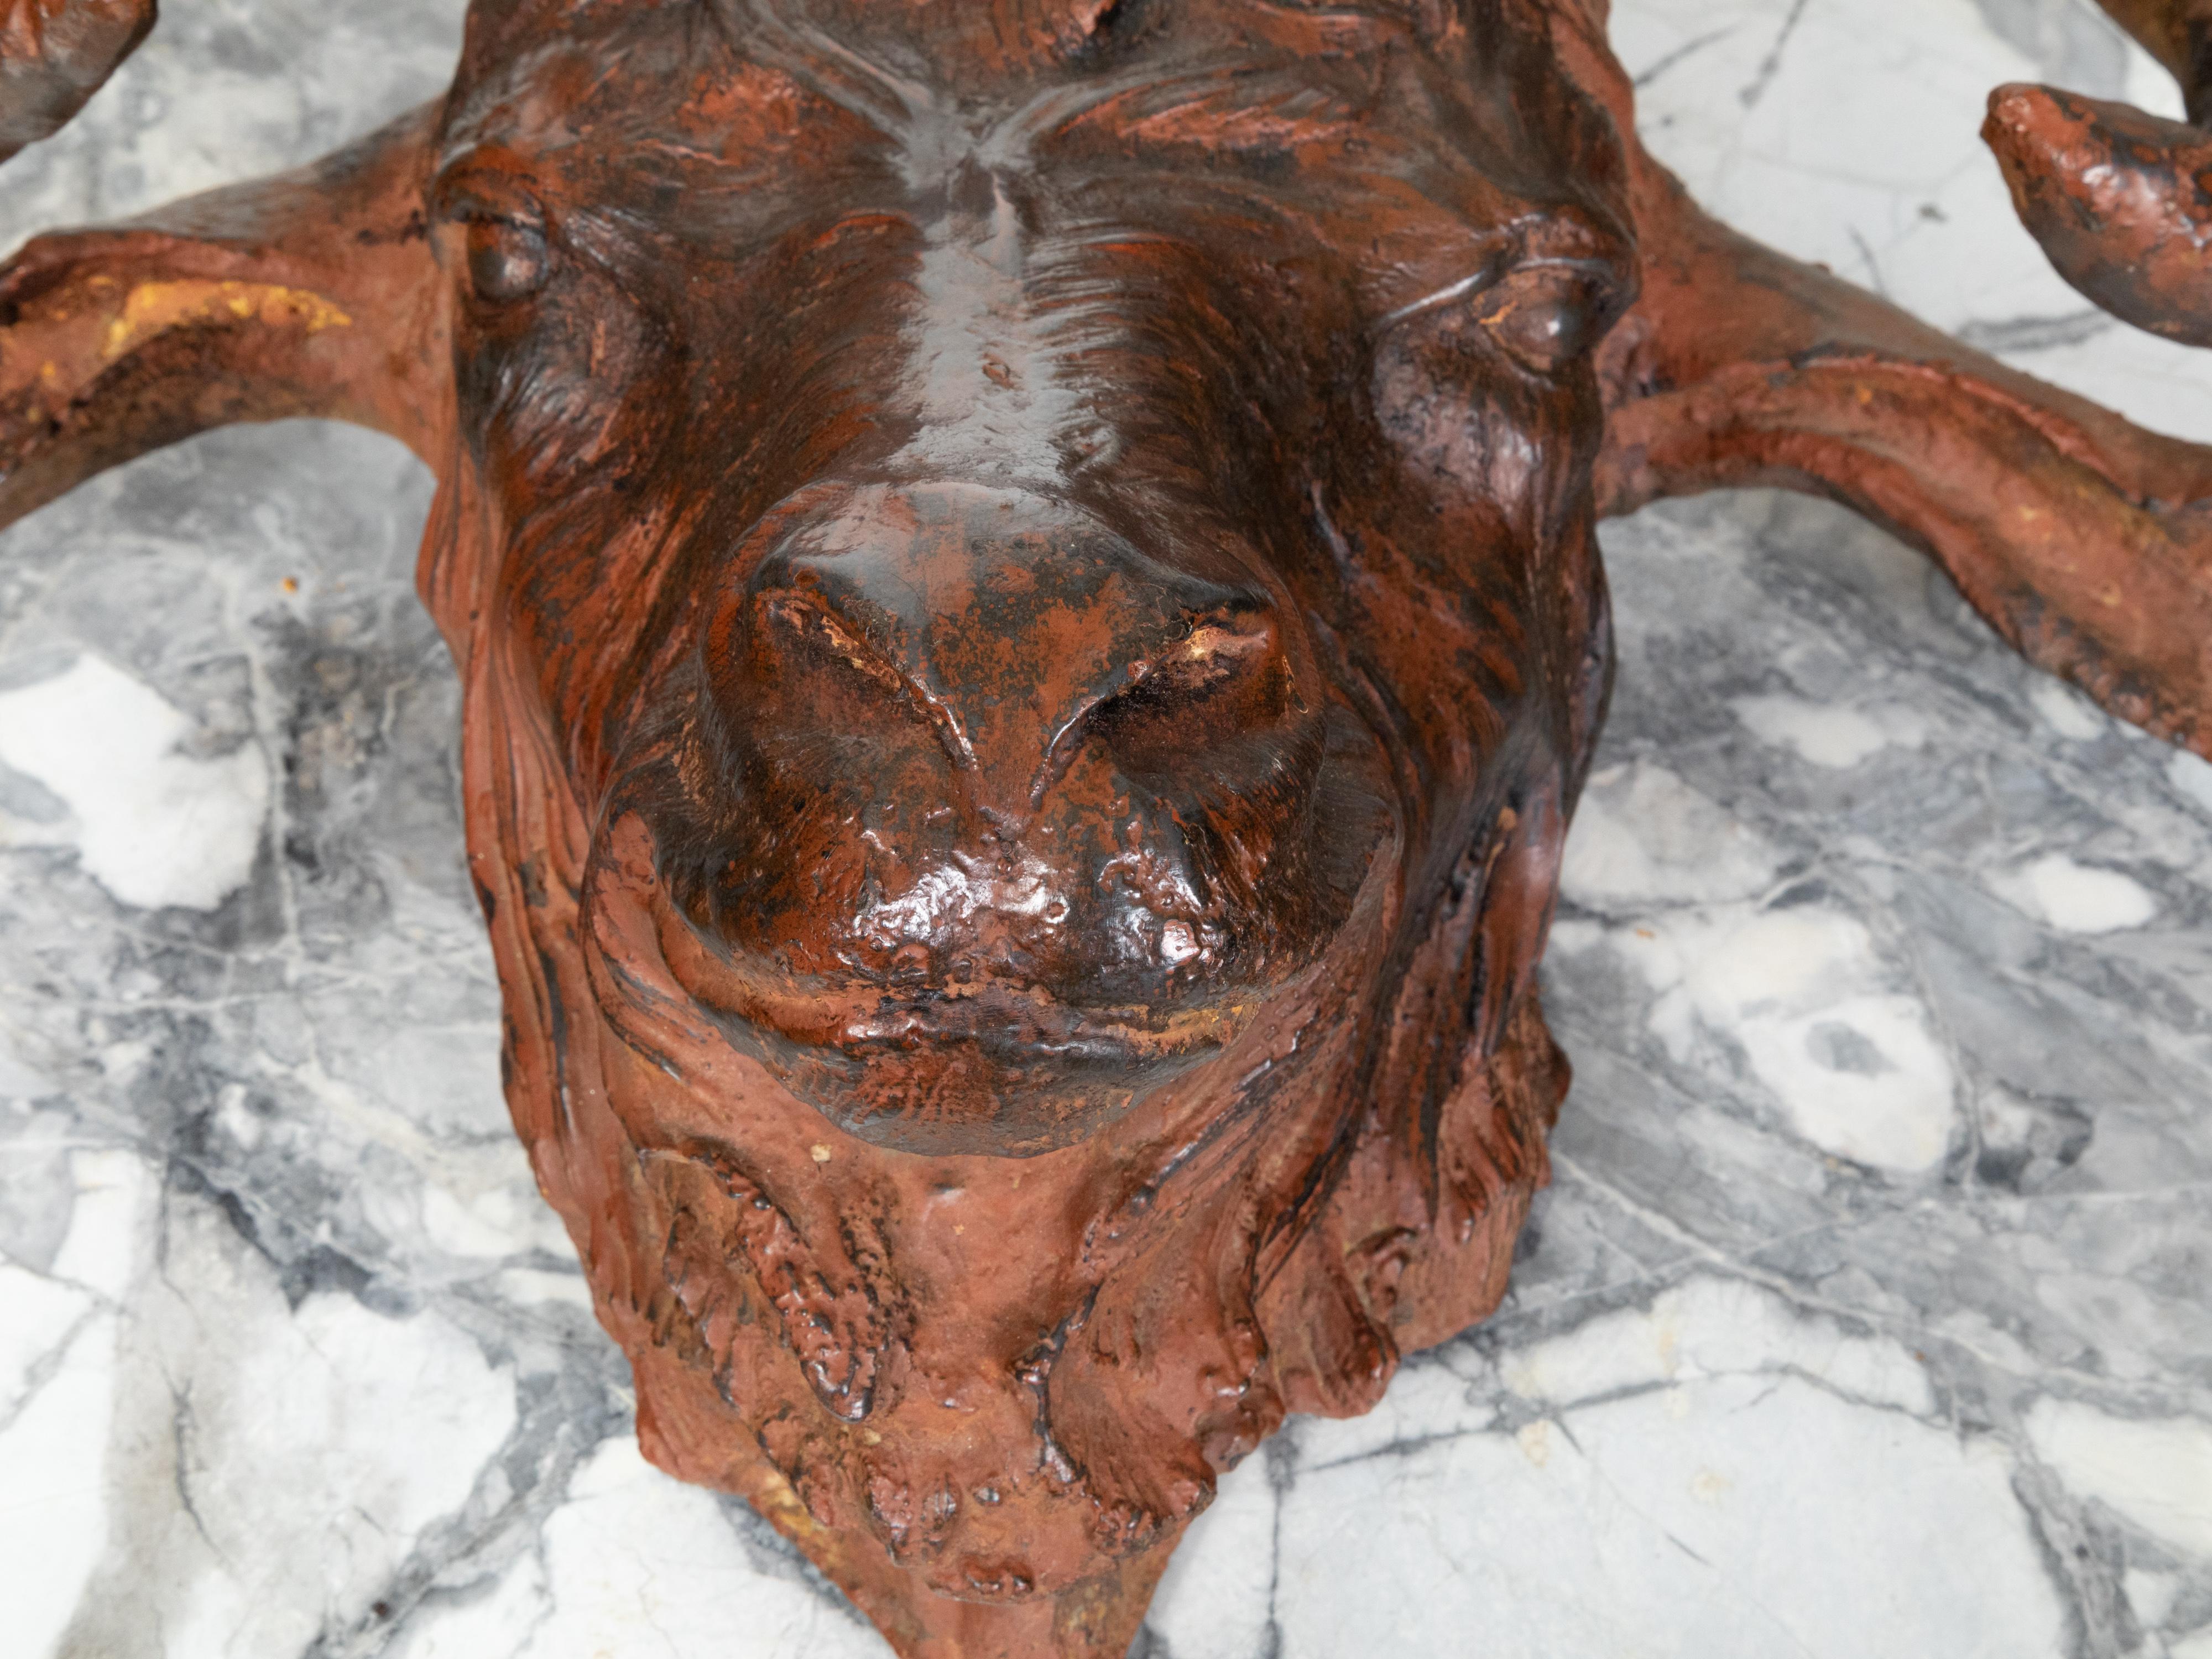 Rustic Italian 19th Century Patinated Iron Ram's Head Sculpture with Rusty Finish For Sale